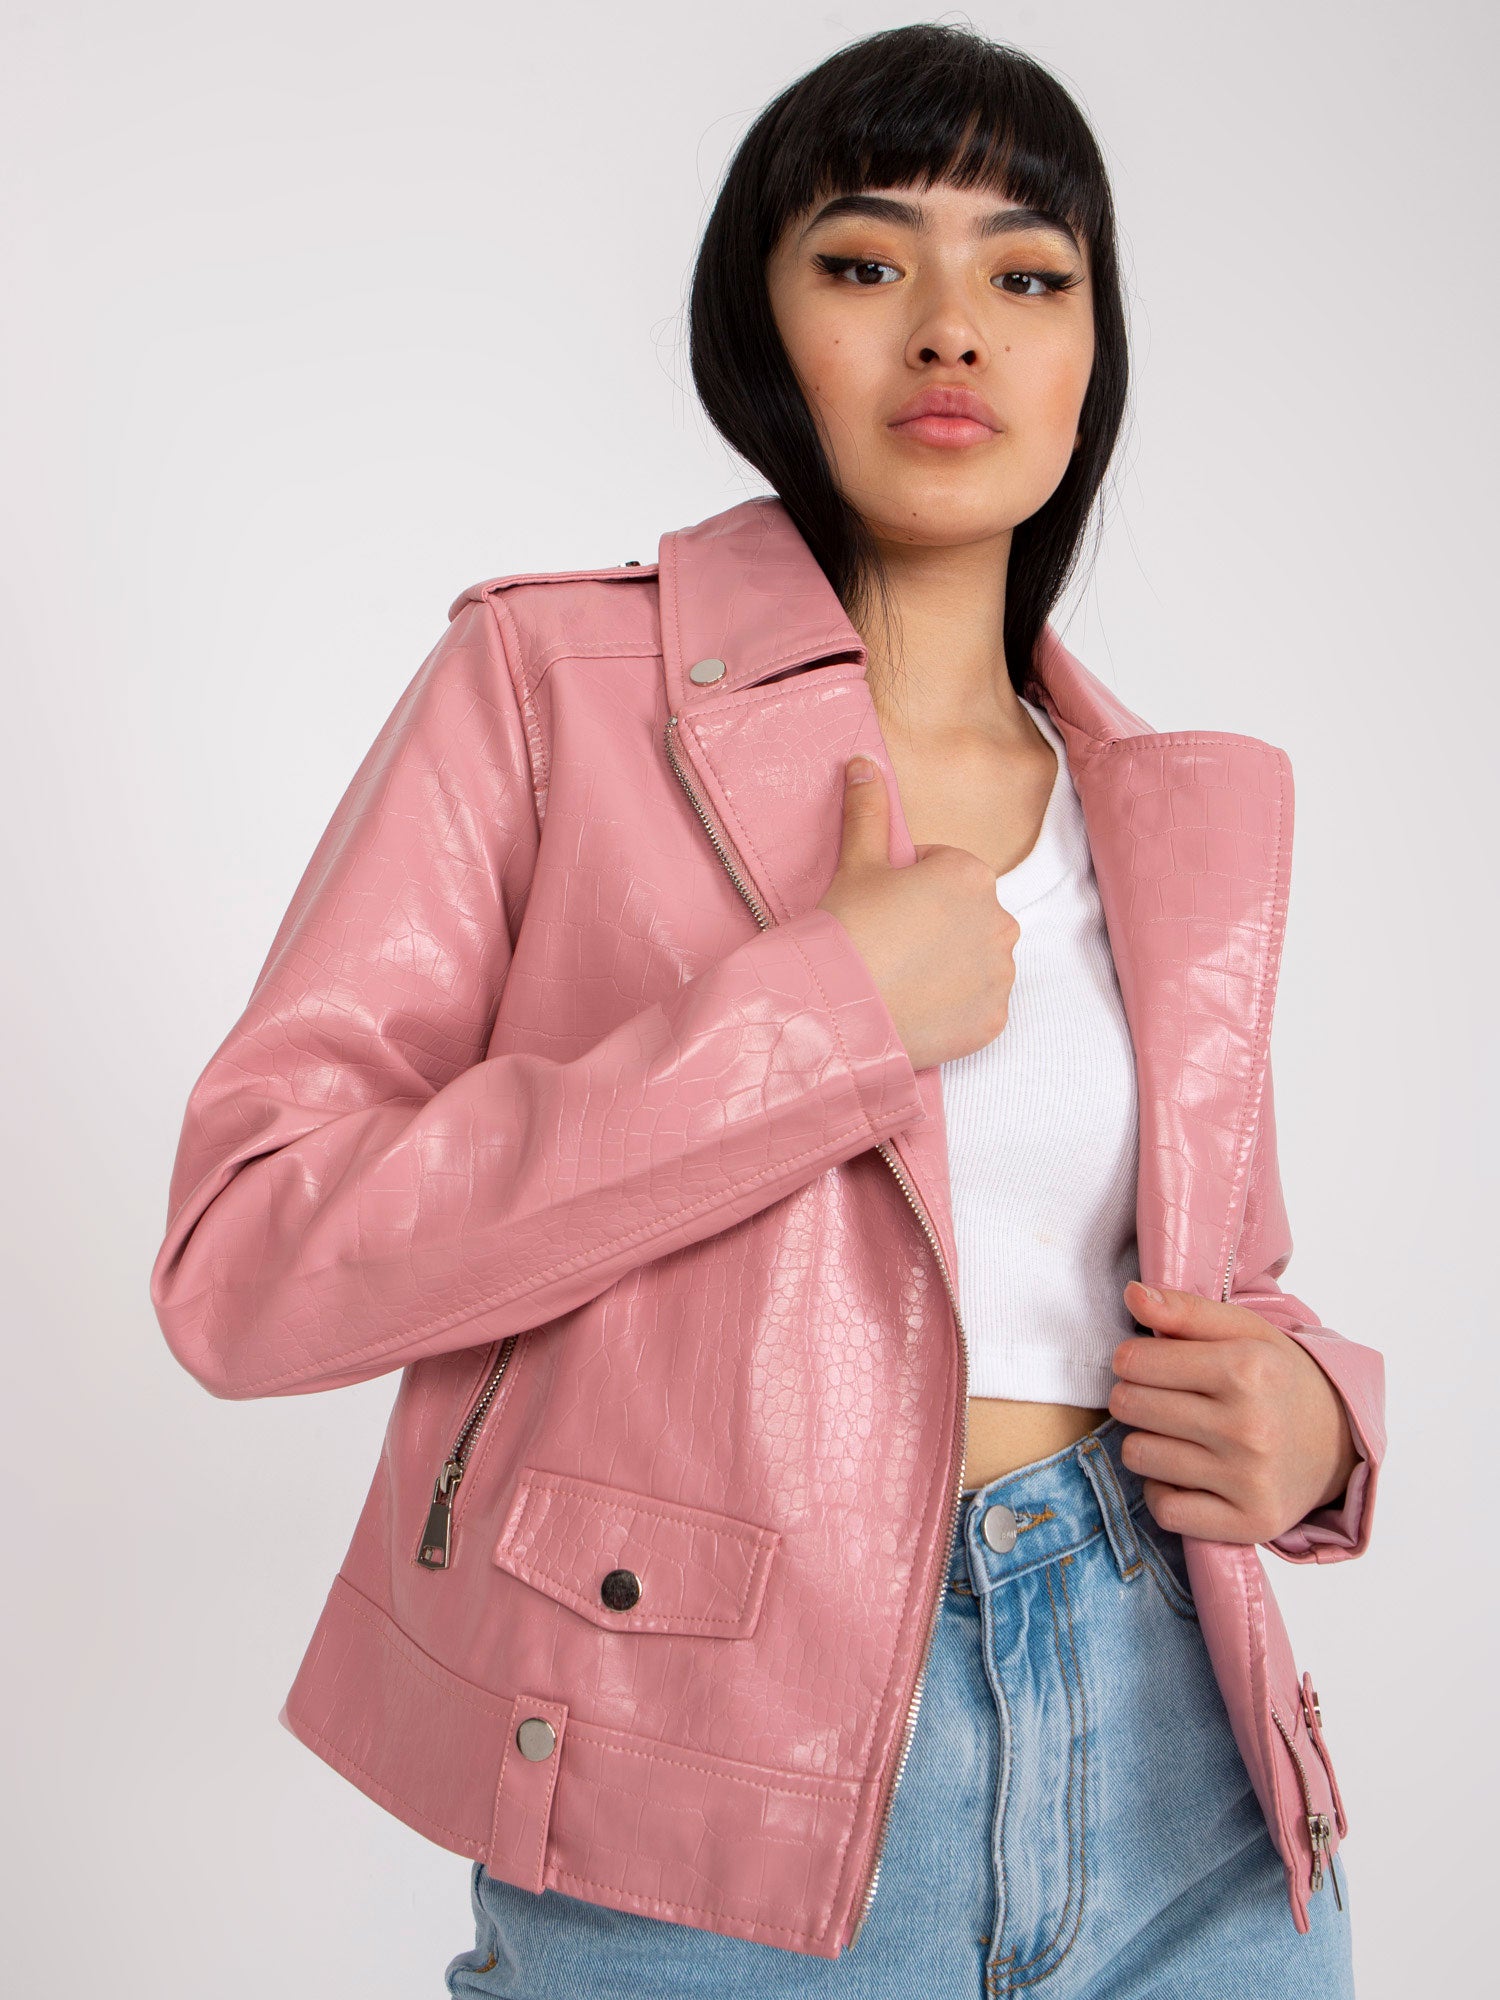 Buy Pink PU Leather Jacket at Strictly